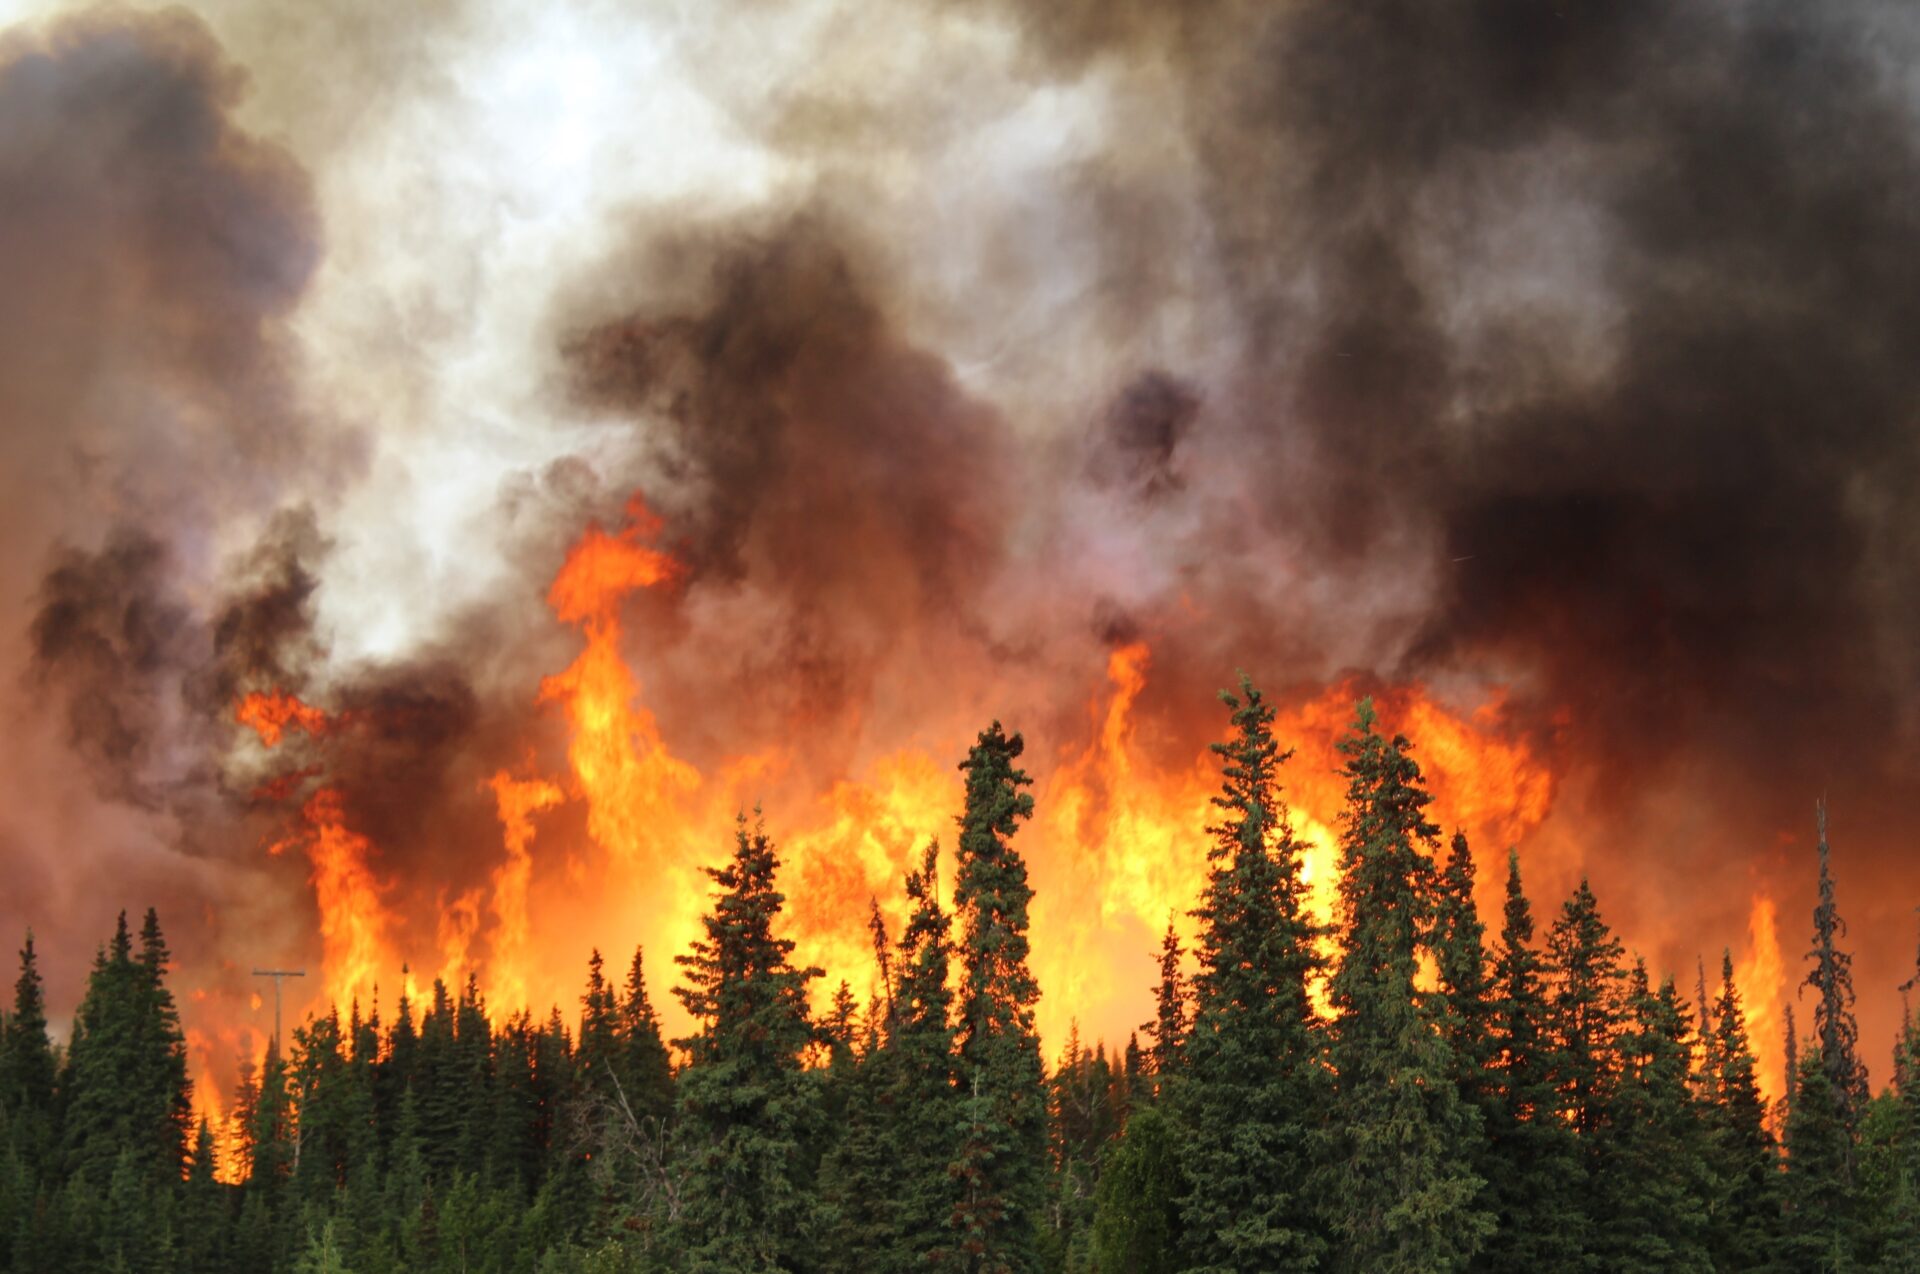 A wildfire engulfs a forest, with fire and smoke atop a section of trees